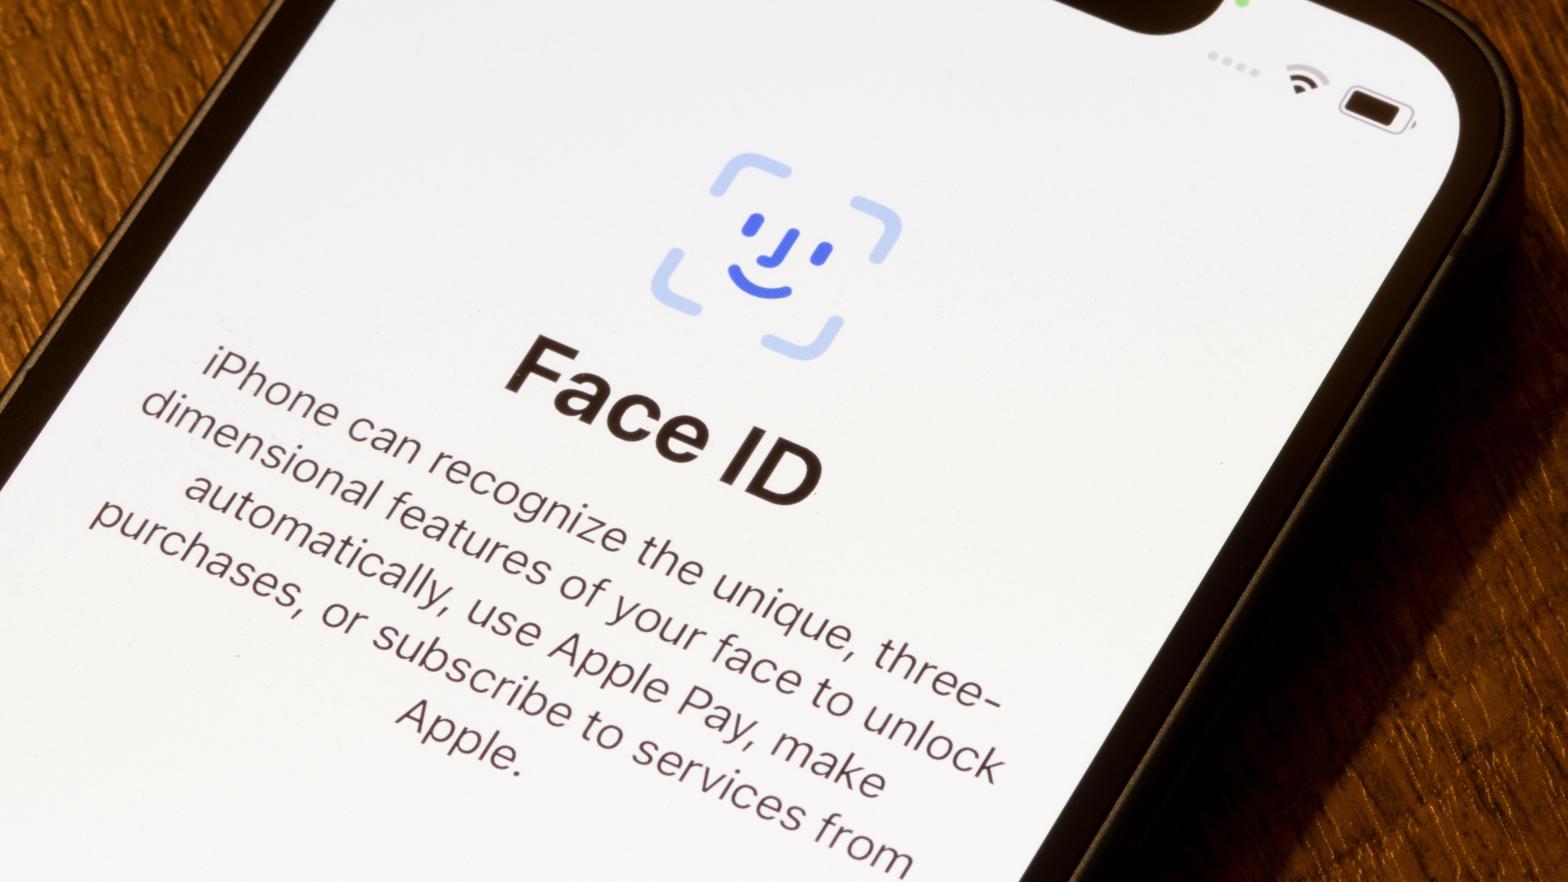 While Apple has both fingerprint and Face ID biometrics to unlock devices, Apple wants to use similar tech to identify all parts of the body for fitness and wellness purposes. (Photo: Tada Images, Shutterstock)